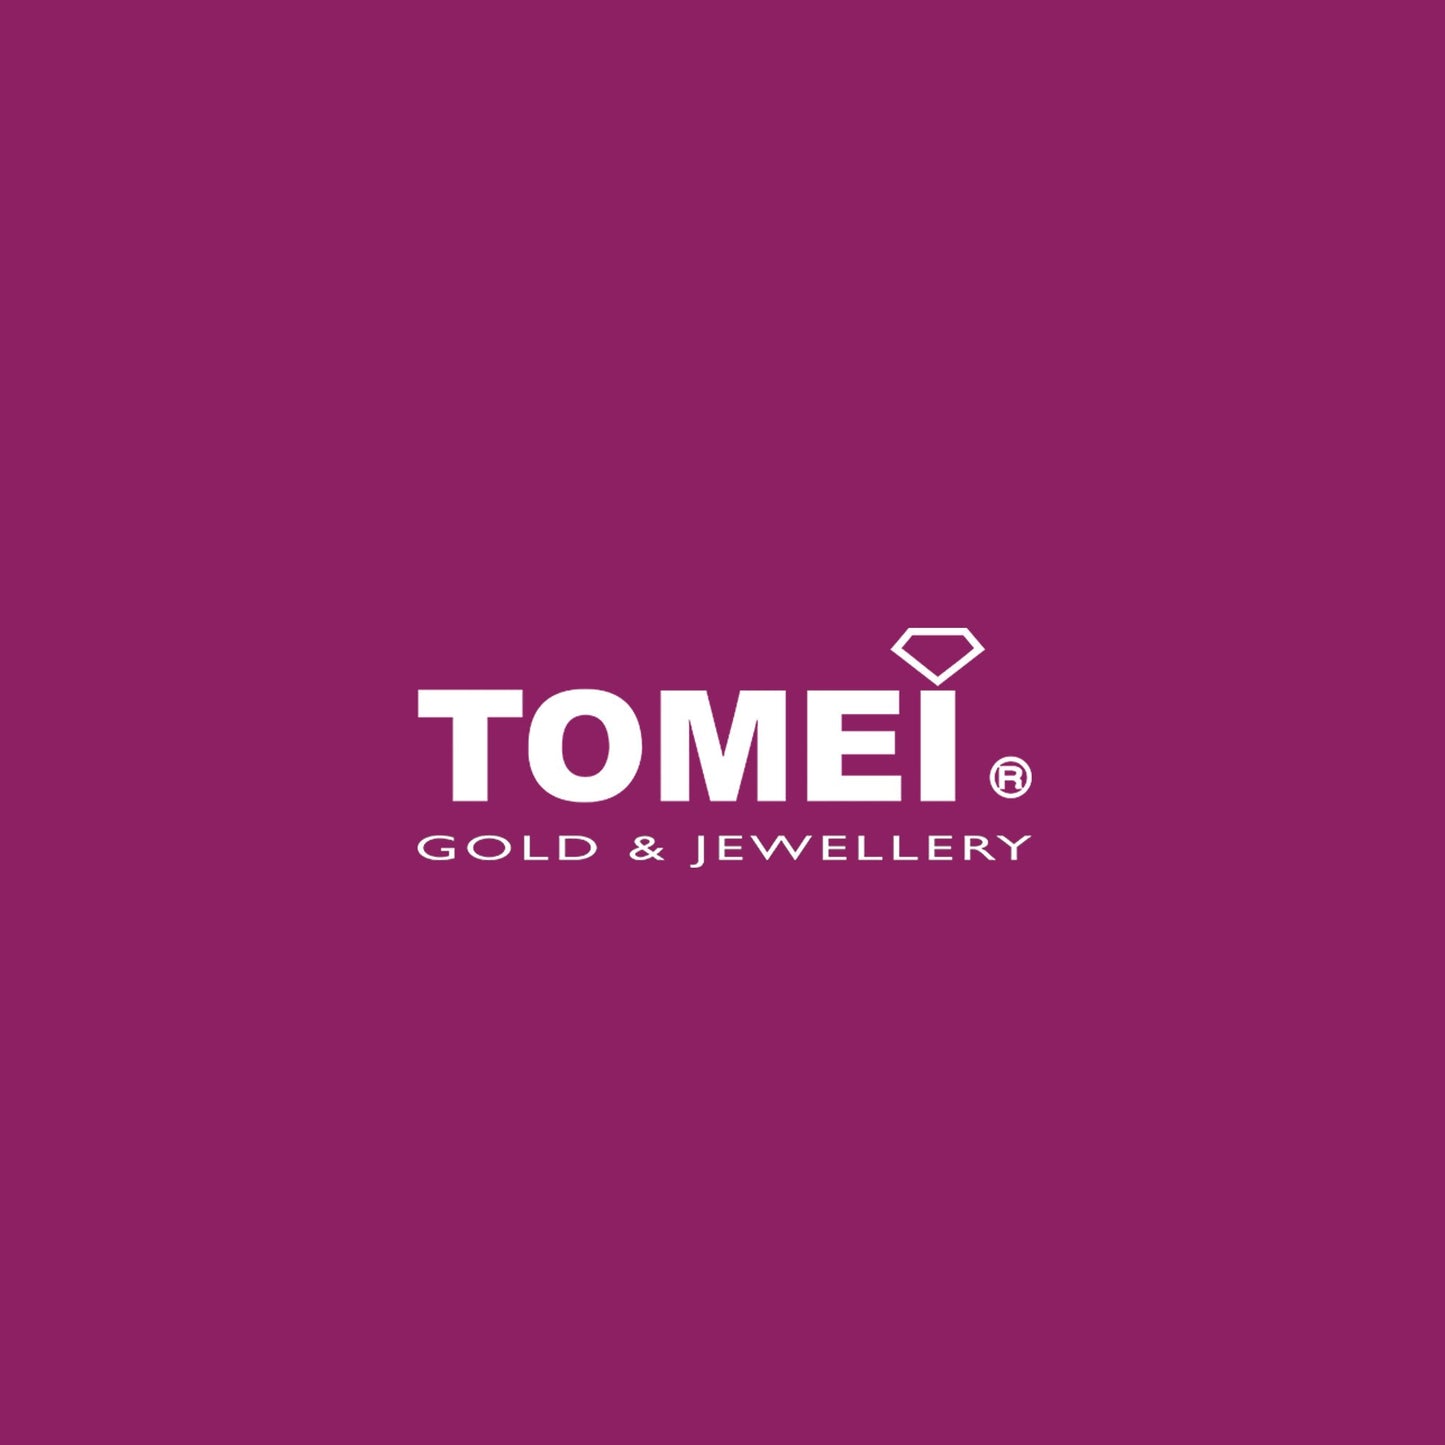 TOMEI Bangle of Style and Grace, White Gold 375 (B0661)